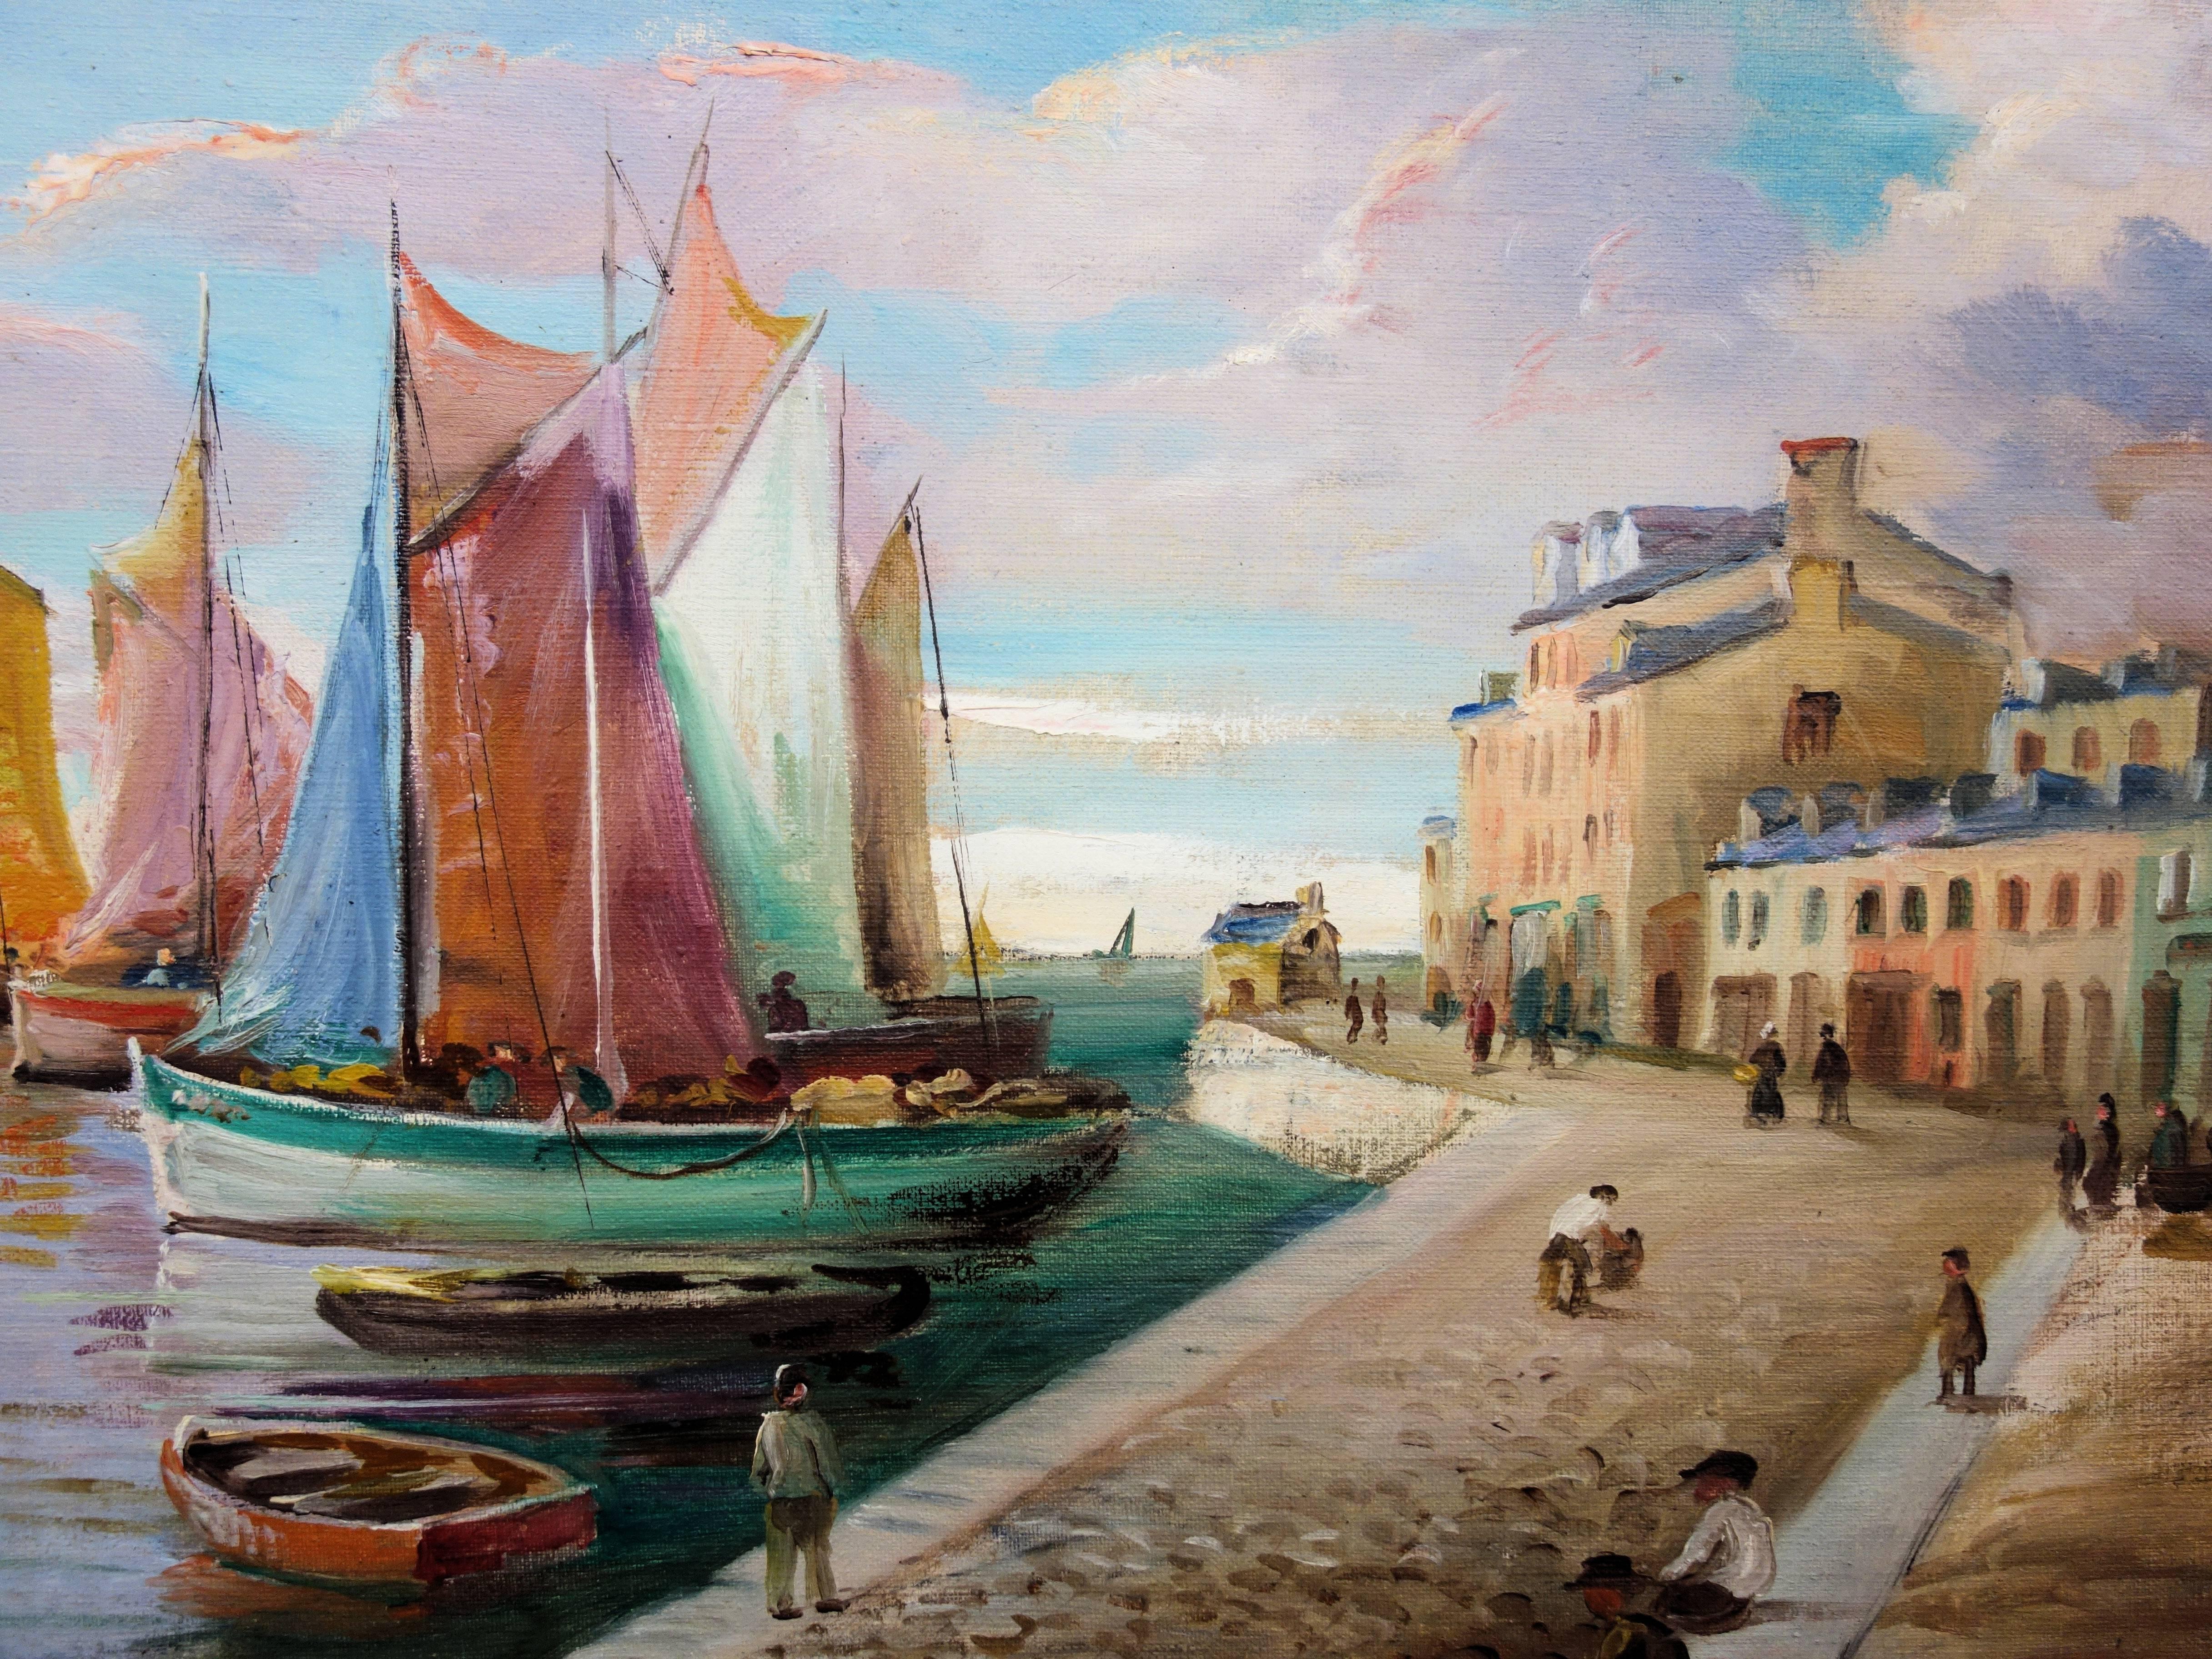 Adrien SIMONETON (1862-1949)
Harbour in the Early Morning (c. 1920)

Oil on canvas
Signed bottom right
46 x 92 cm at view (c. 18 x 37 in)
Golden frame (signed Bouche) xxxxxxxx

Very good condition, light surface defects - Small lost and uses to the